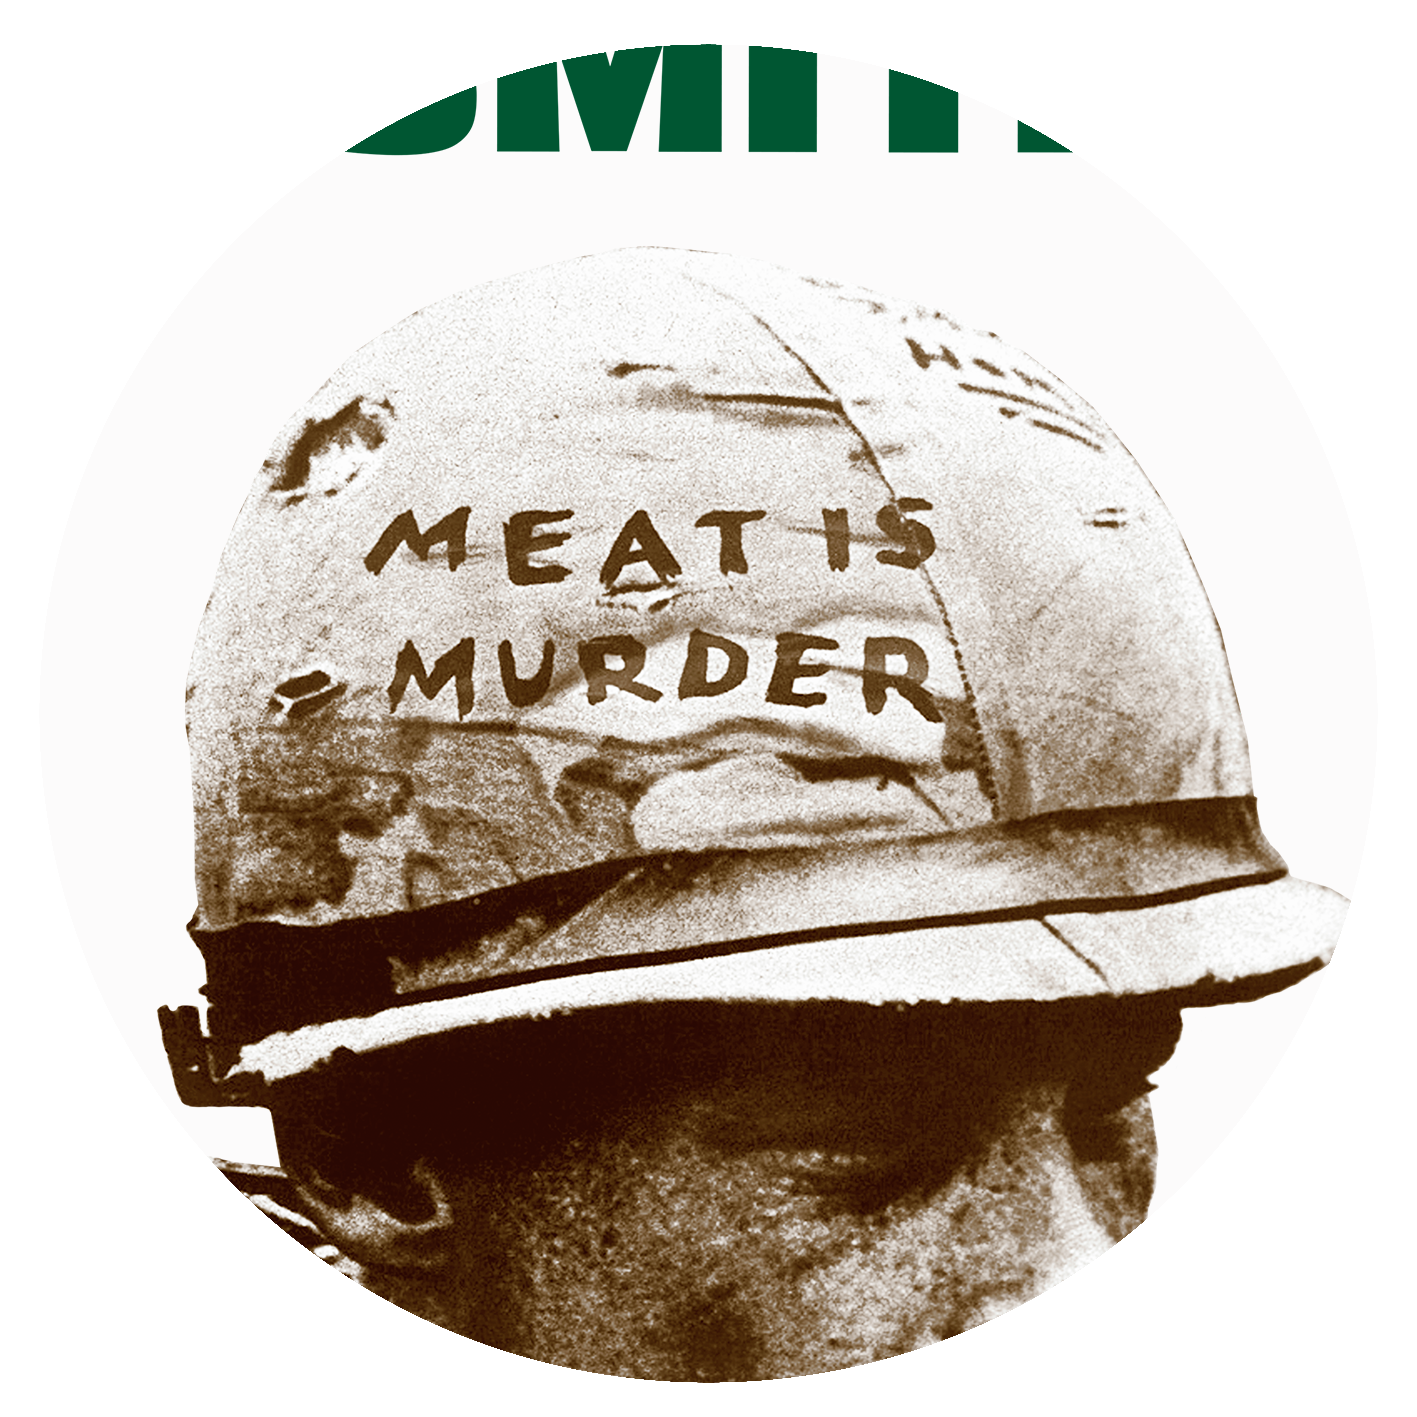 THE SMITHS - Meat Is Murder Tour 1985 - Soldier - Green Text